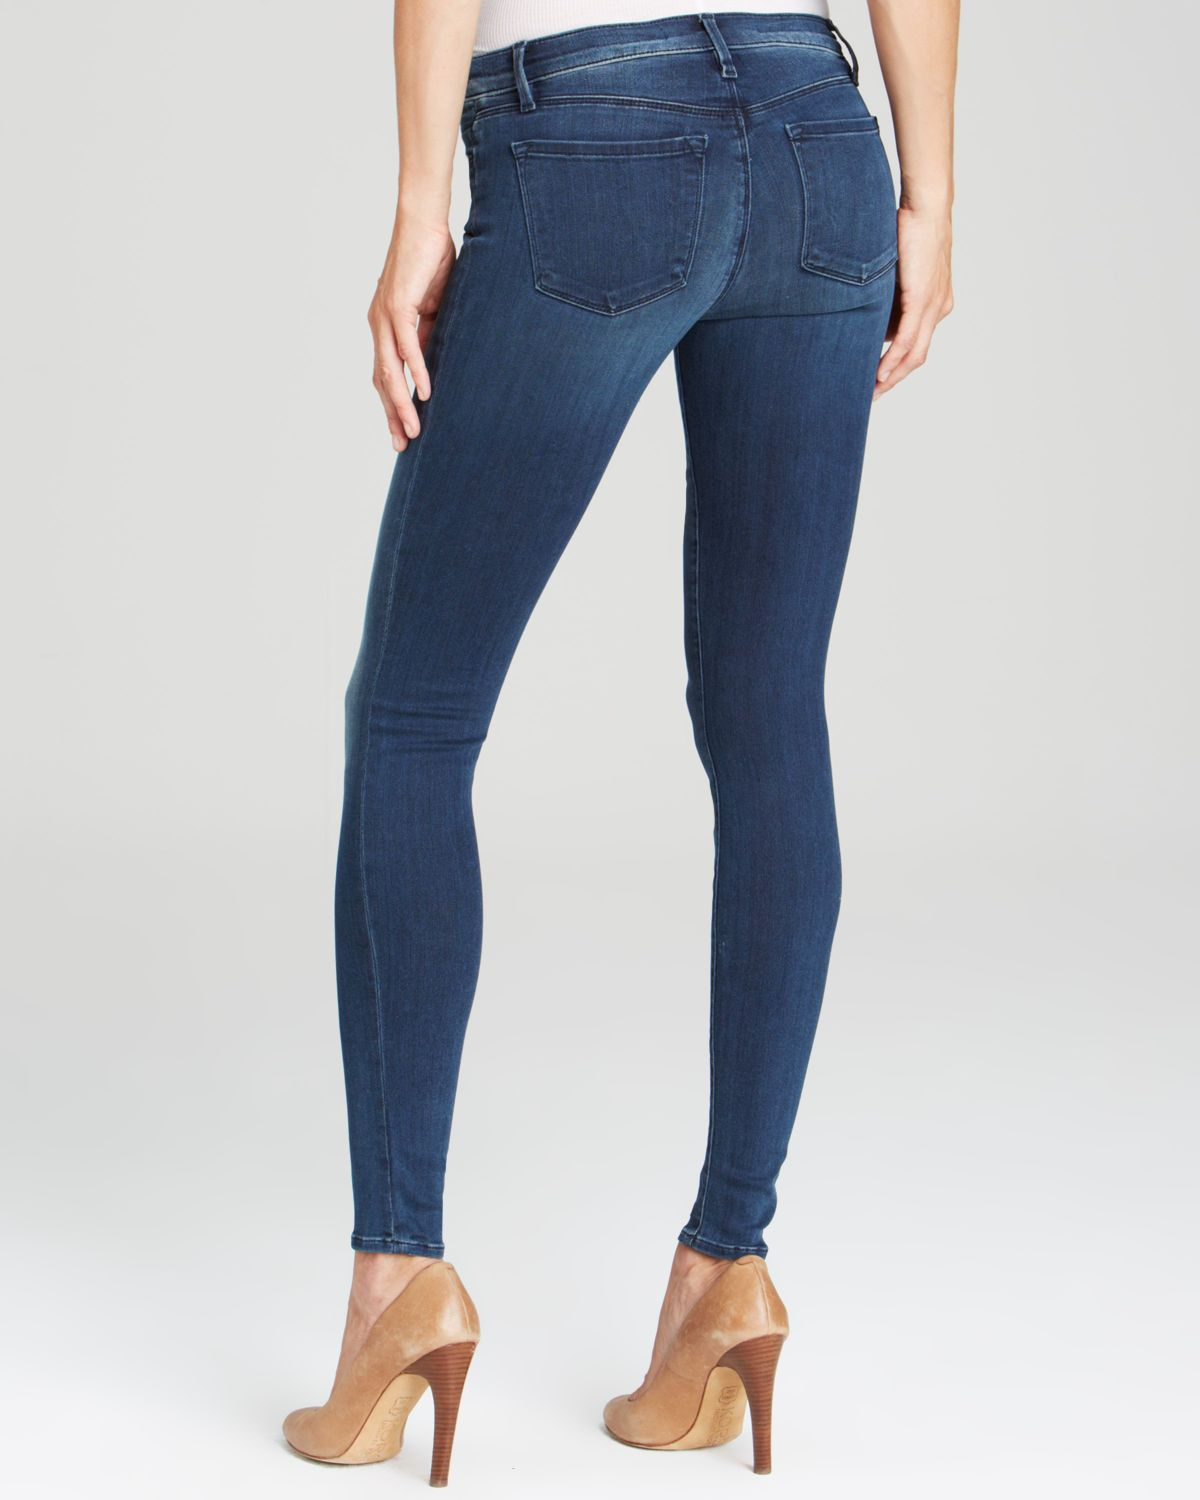 Lyst - J Brand Jeans - Stocking Maria High Rise Skinny In Suspense in Blue